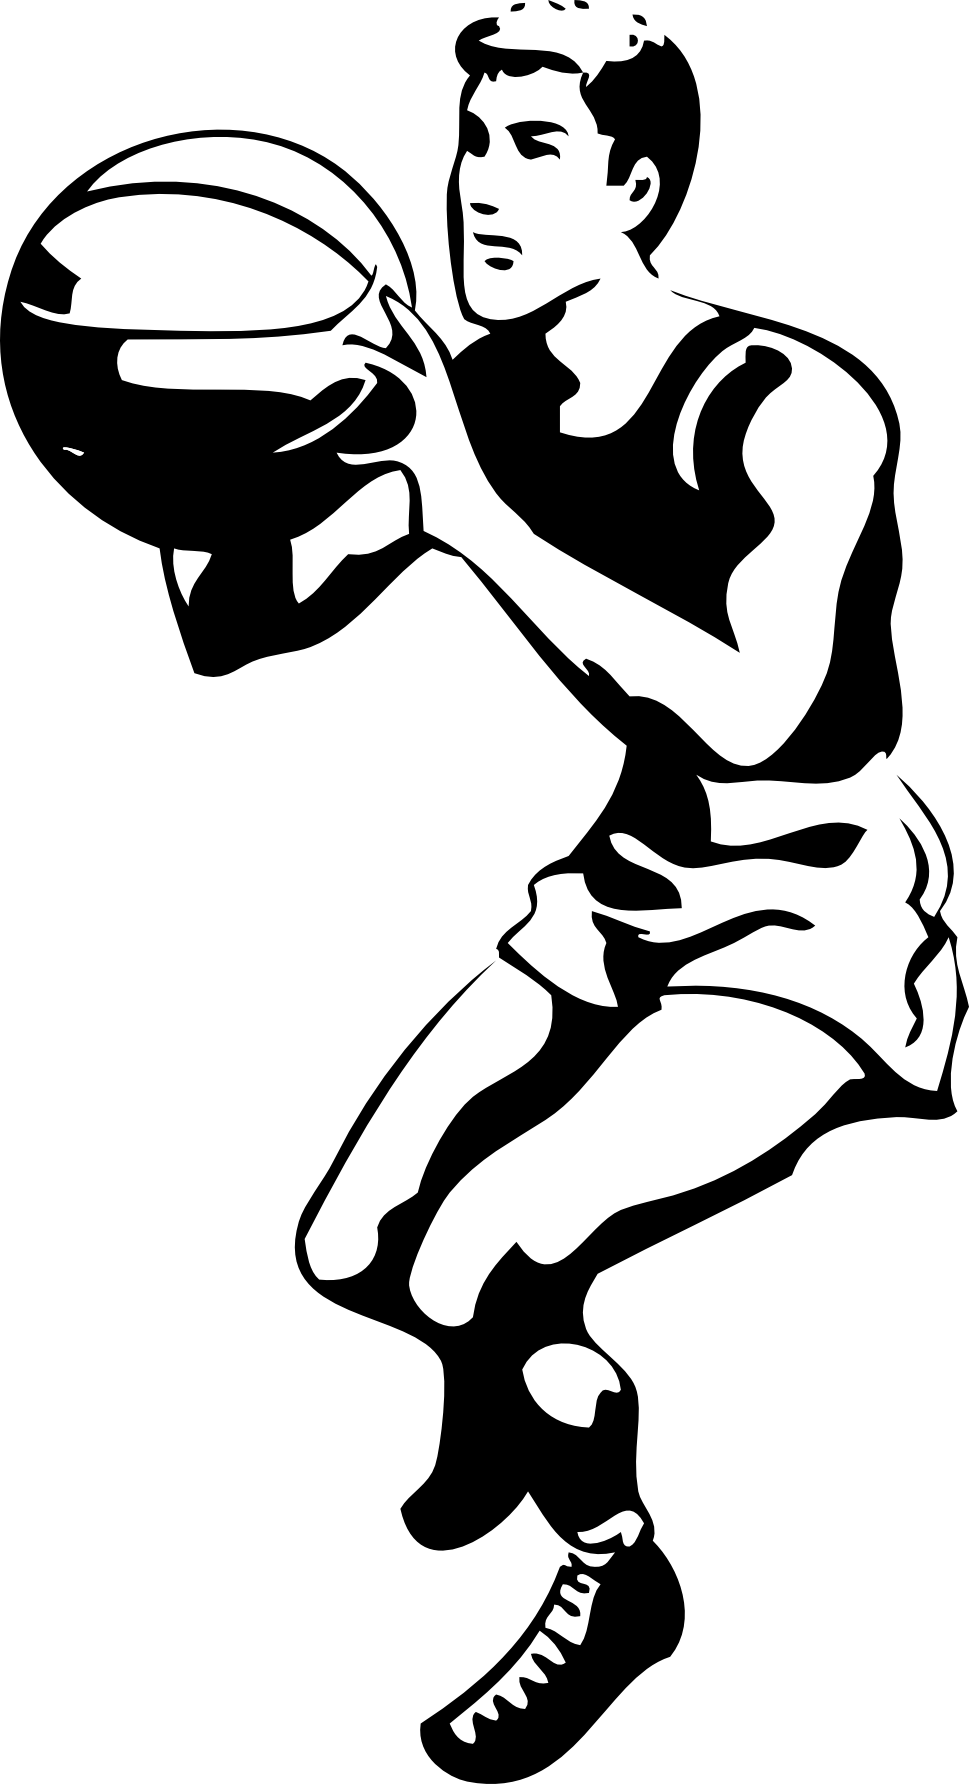 Black And White Images Basketball - ClipArt Best